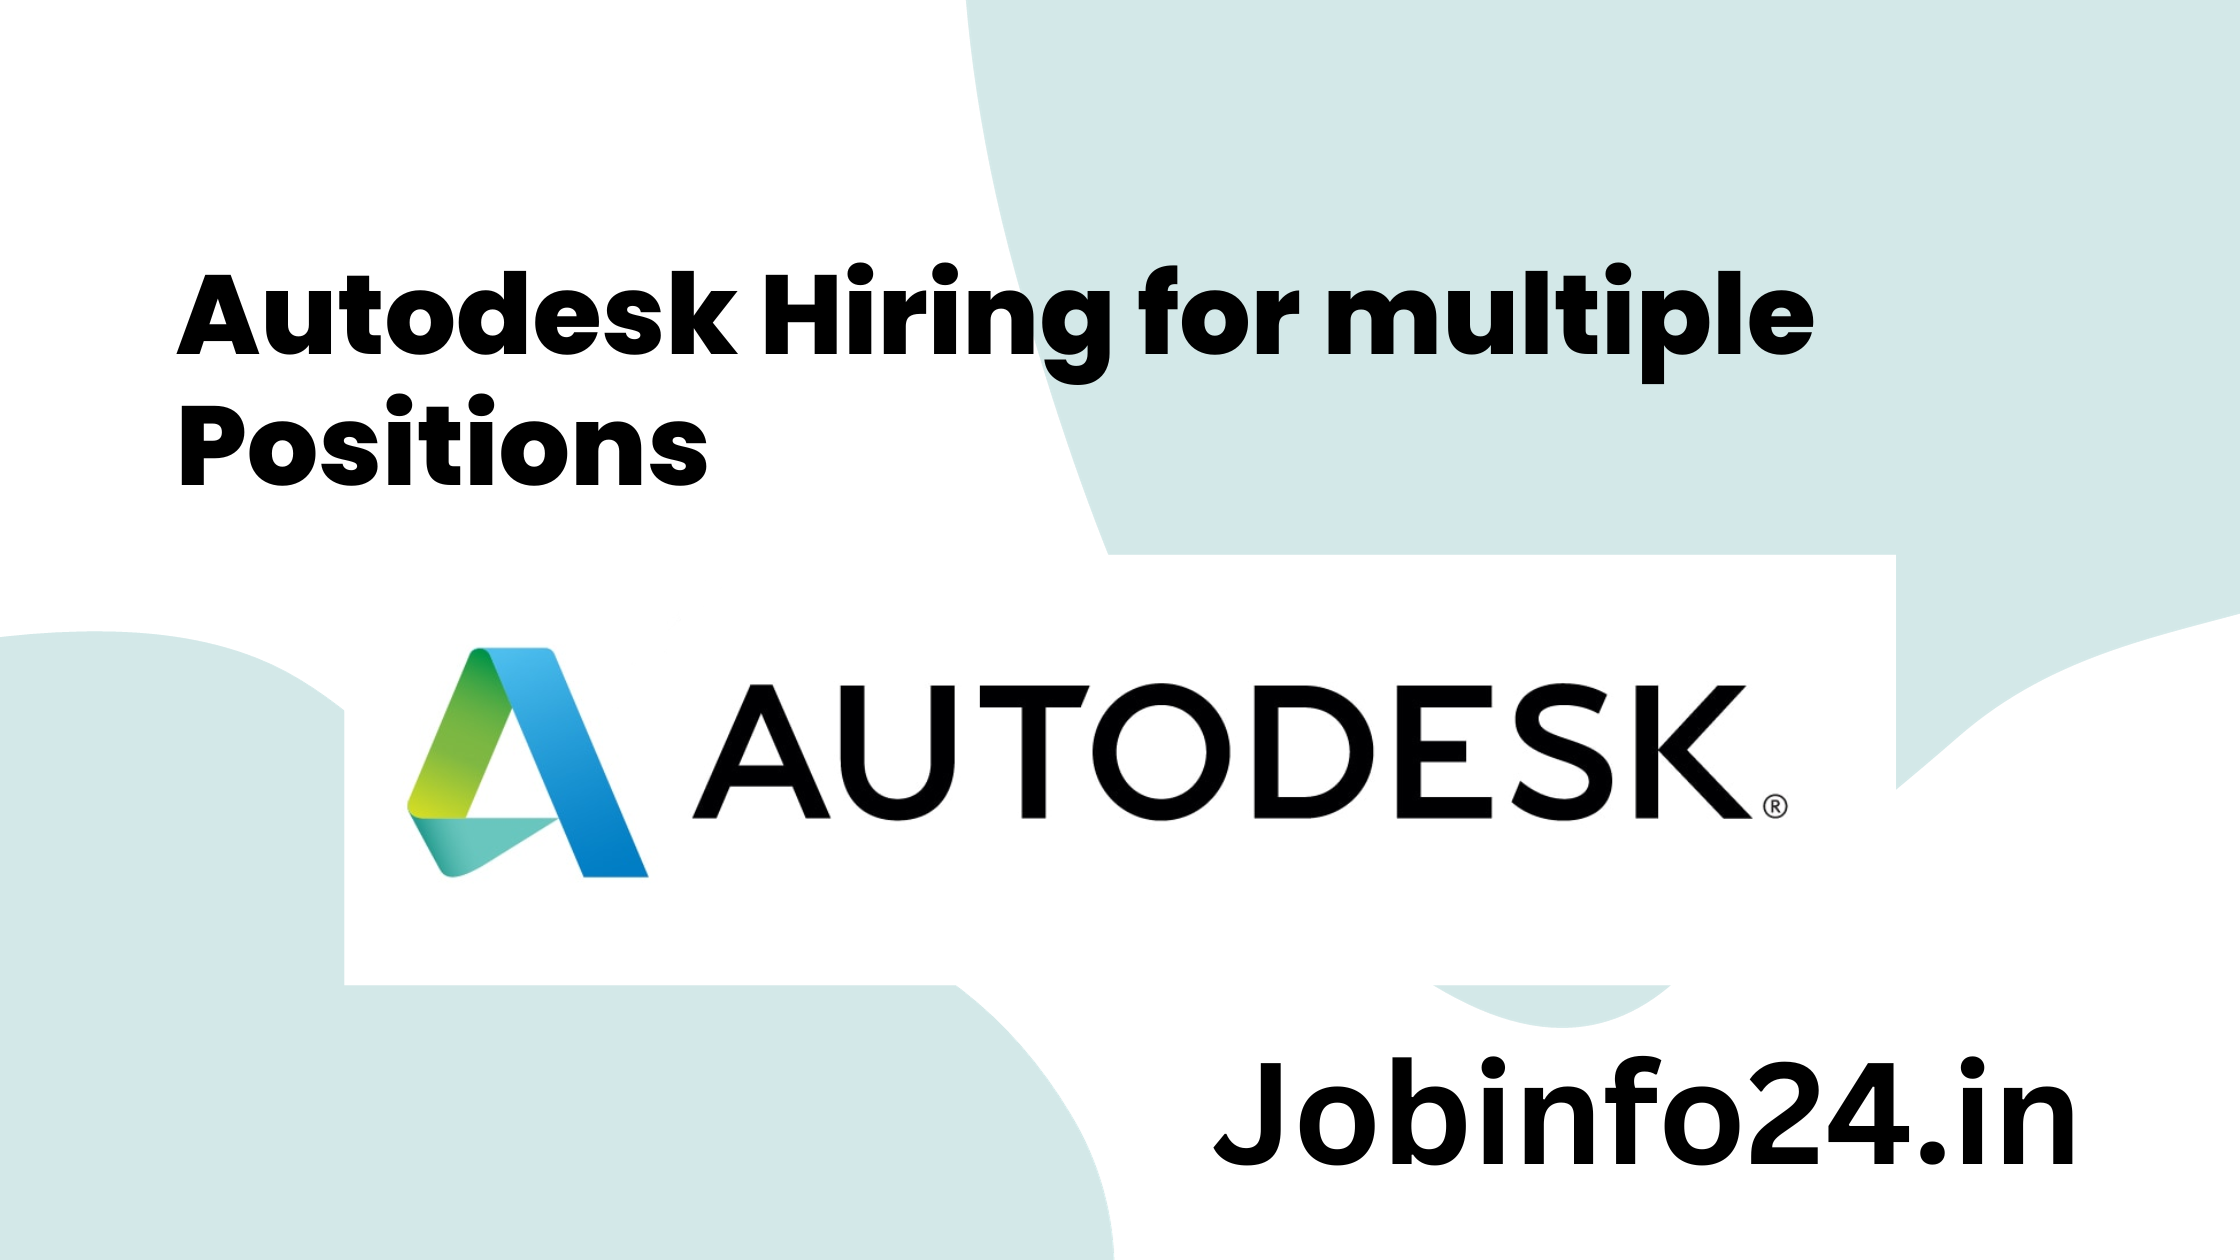 Autodesk Hiring for multiple Positions